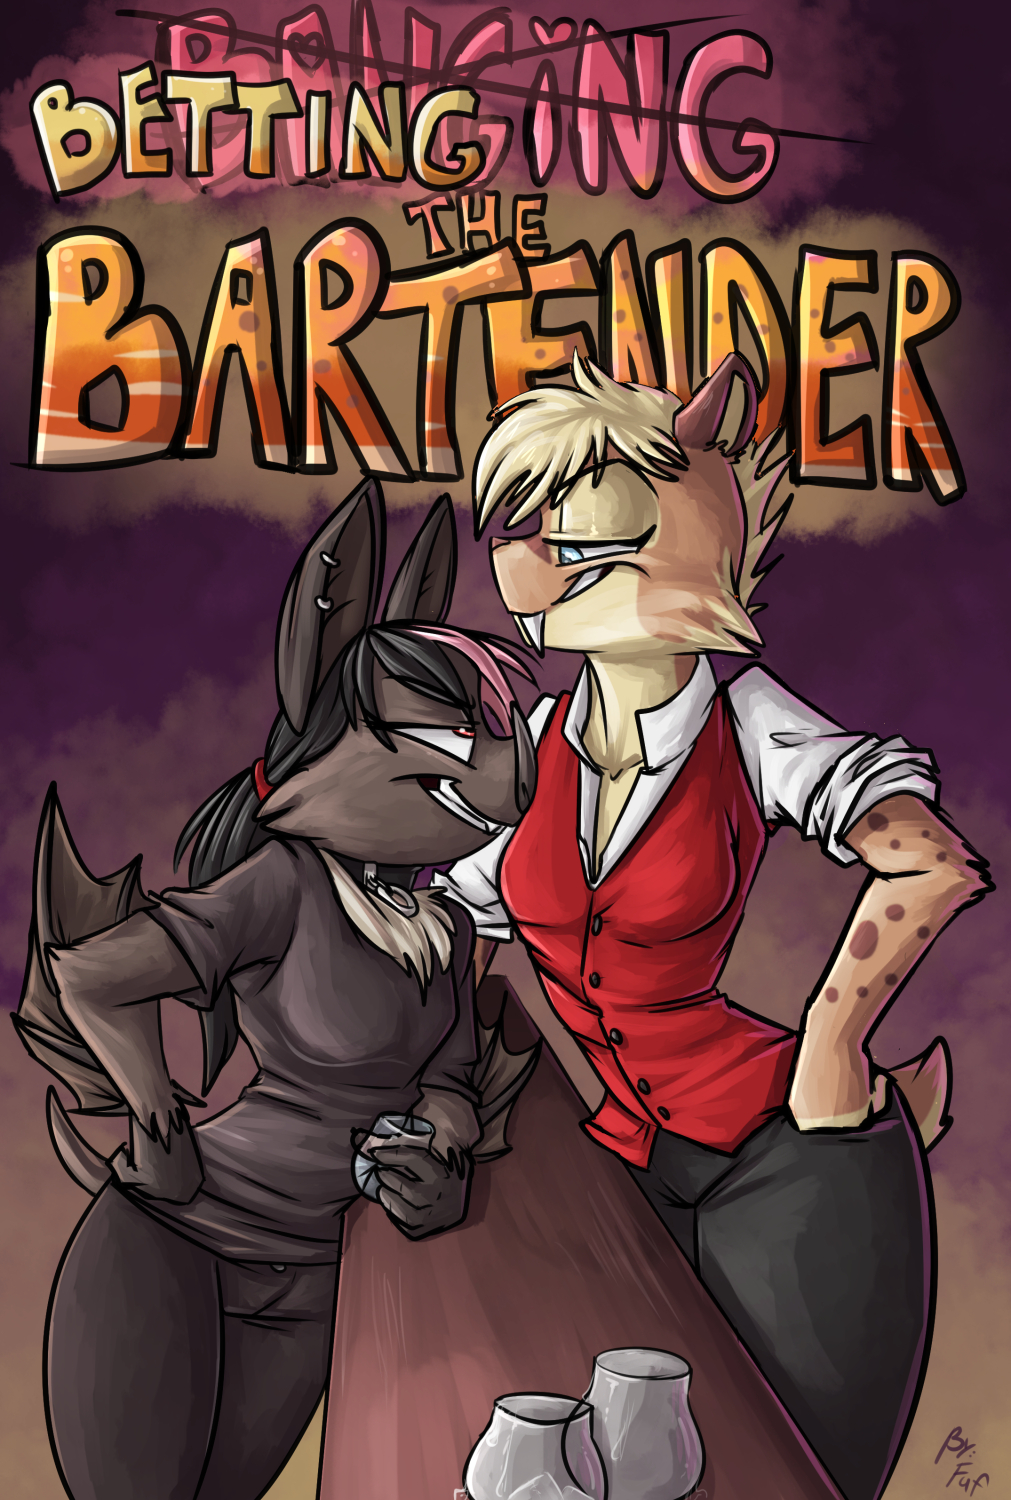 Betting the Bartender by Fuf Porn Comics